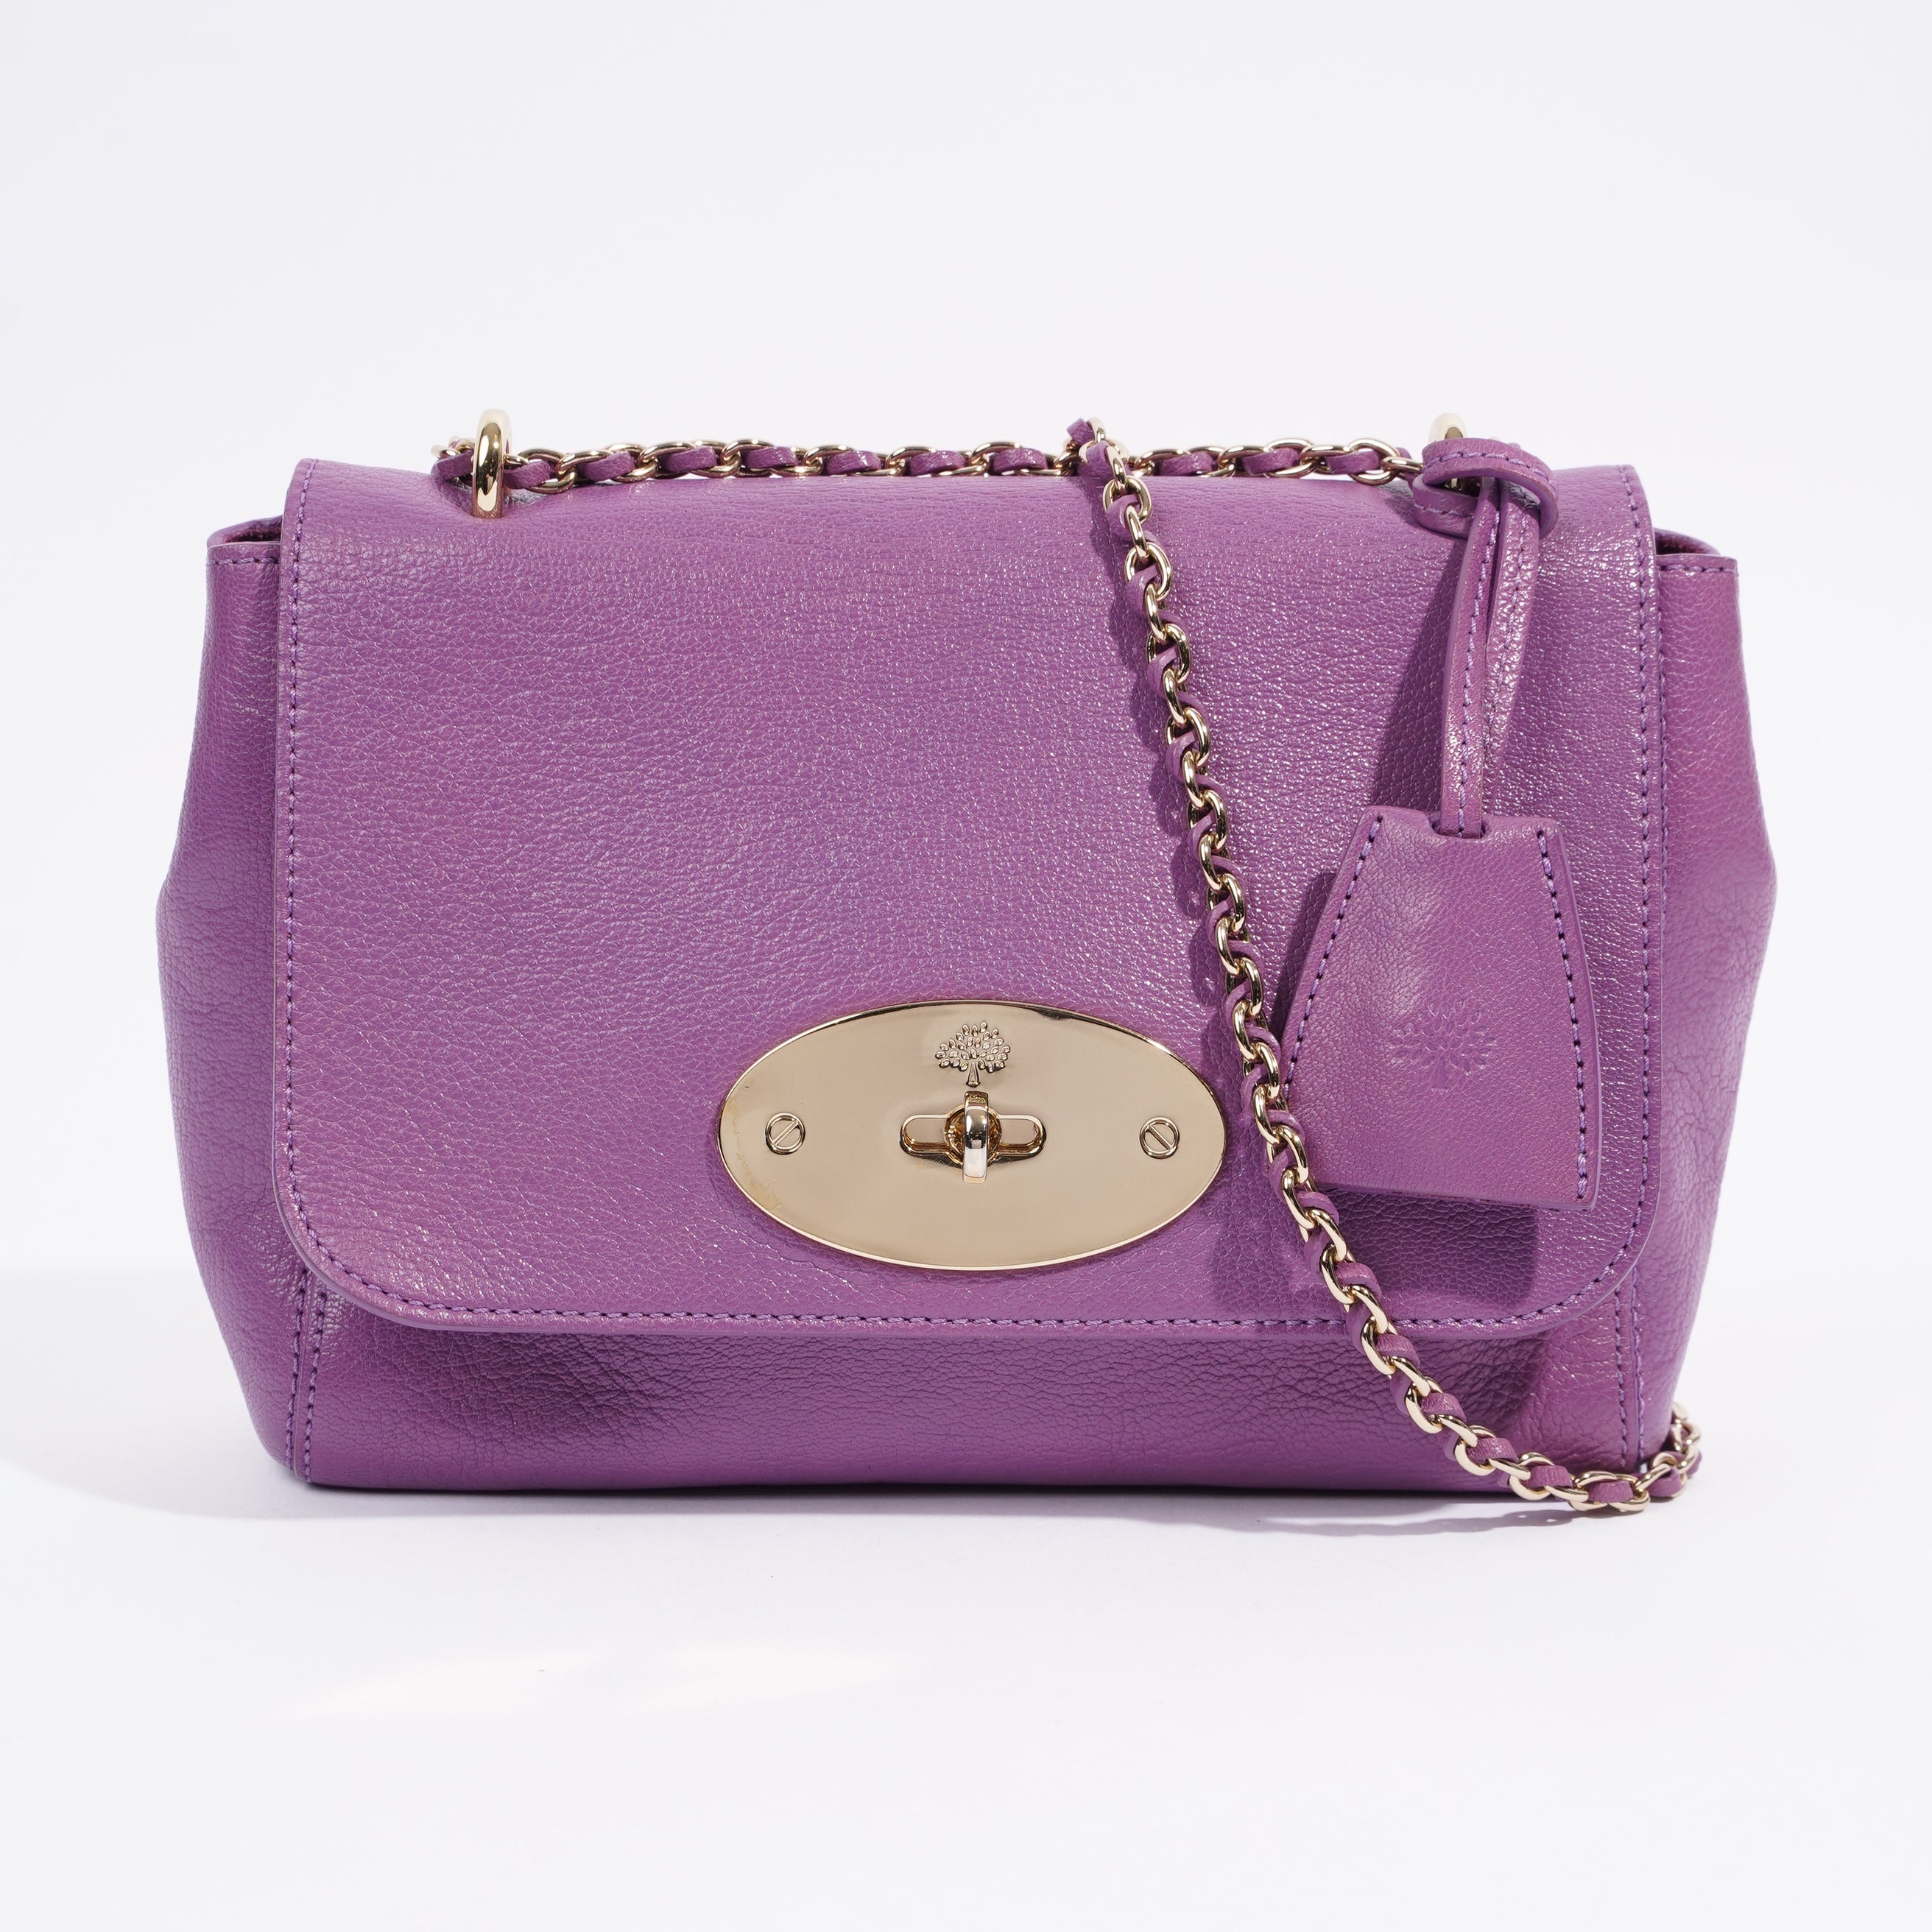 Darley leather handbag Mulberry Purple in Leather - 40996572